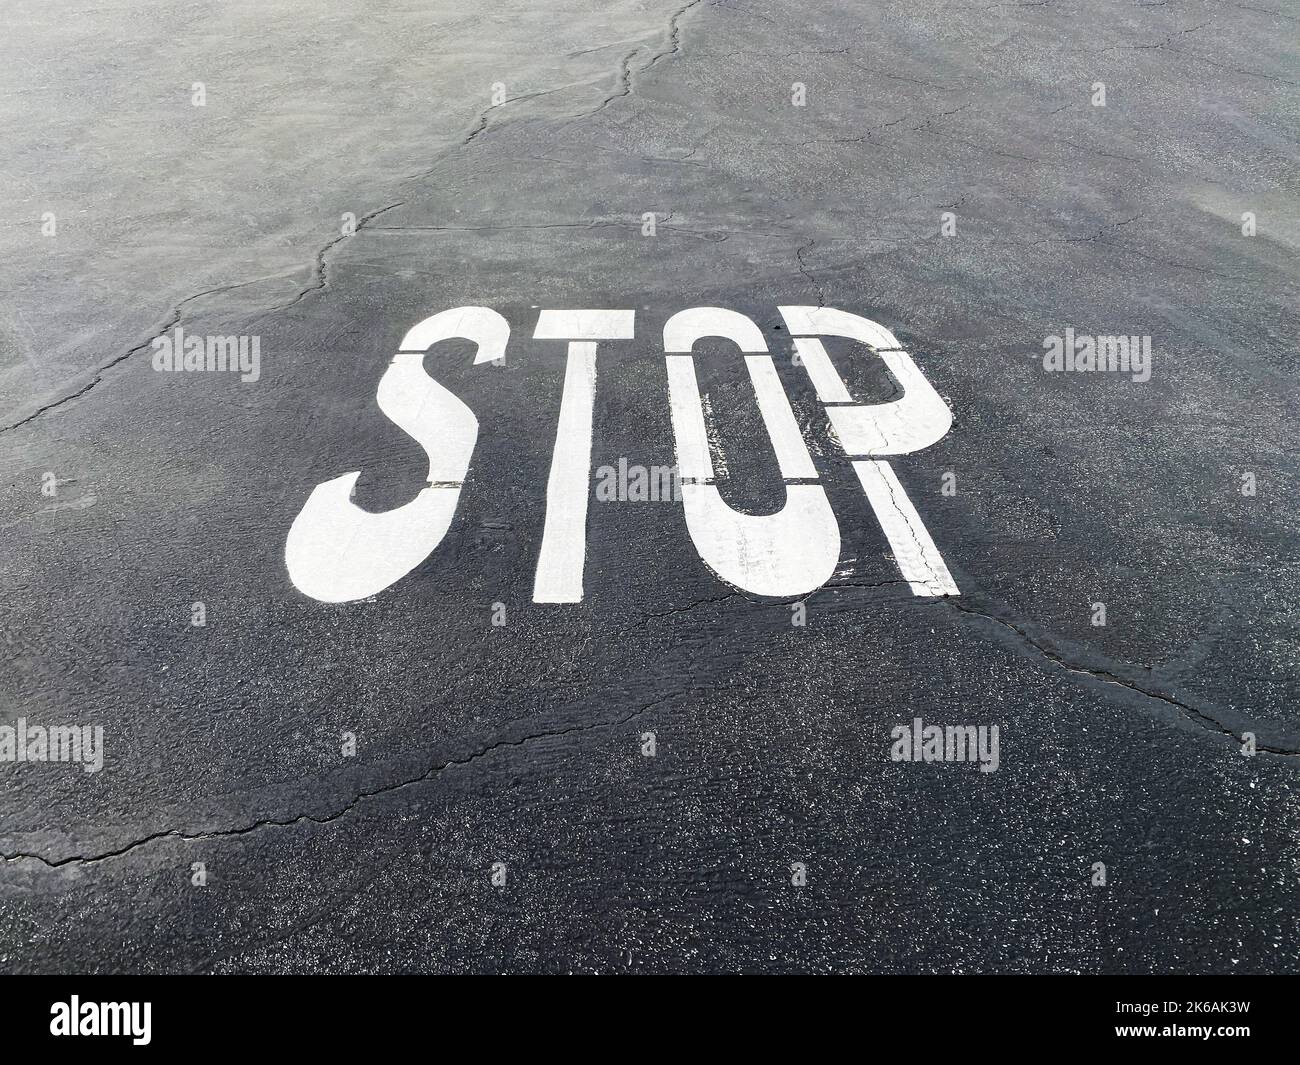 a paved road asphalt stop sign painted roadway intersection warning symbol street signage industrial backdrop Stock Photo